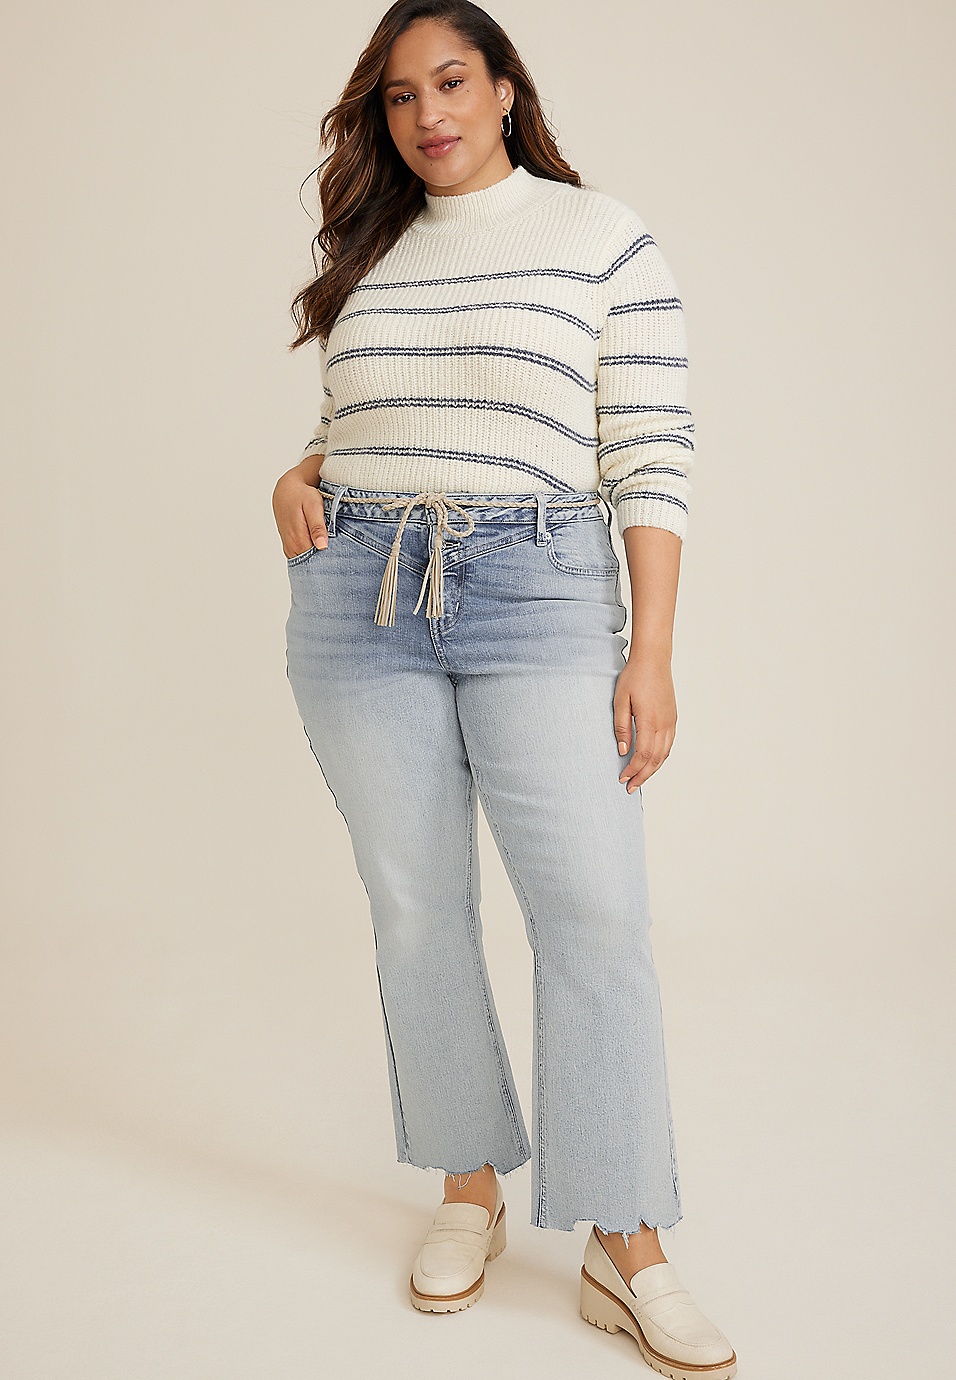 Plus Size m jeans by maurices™ Everflex™ Curvy High Rise Slim Boot Jean